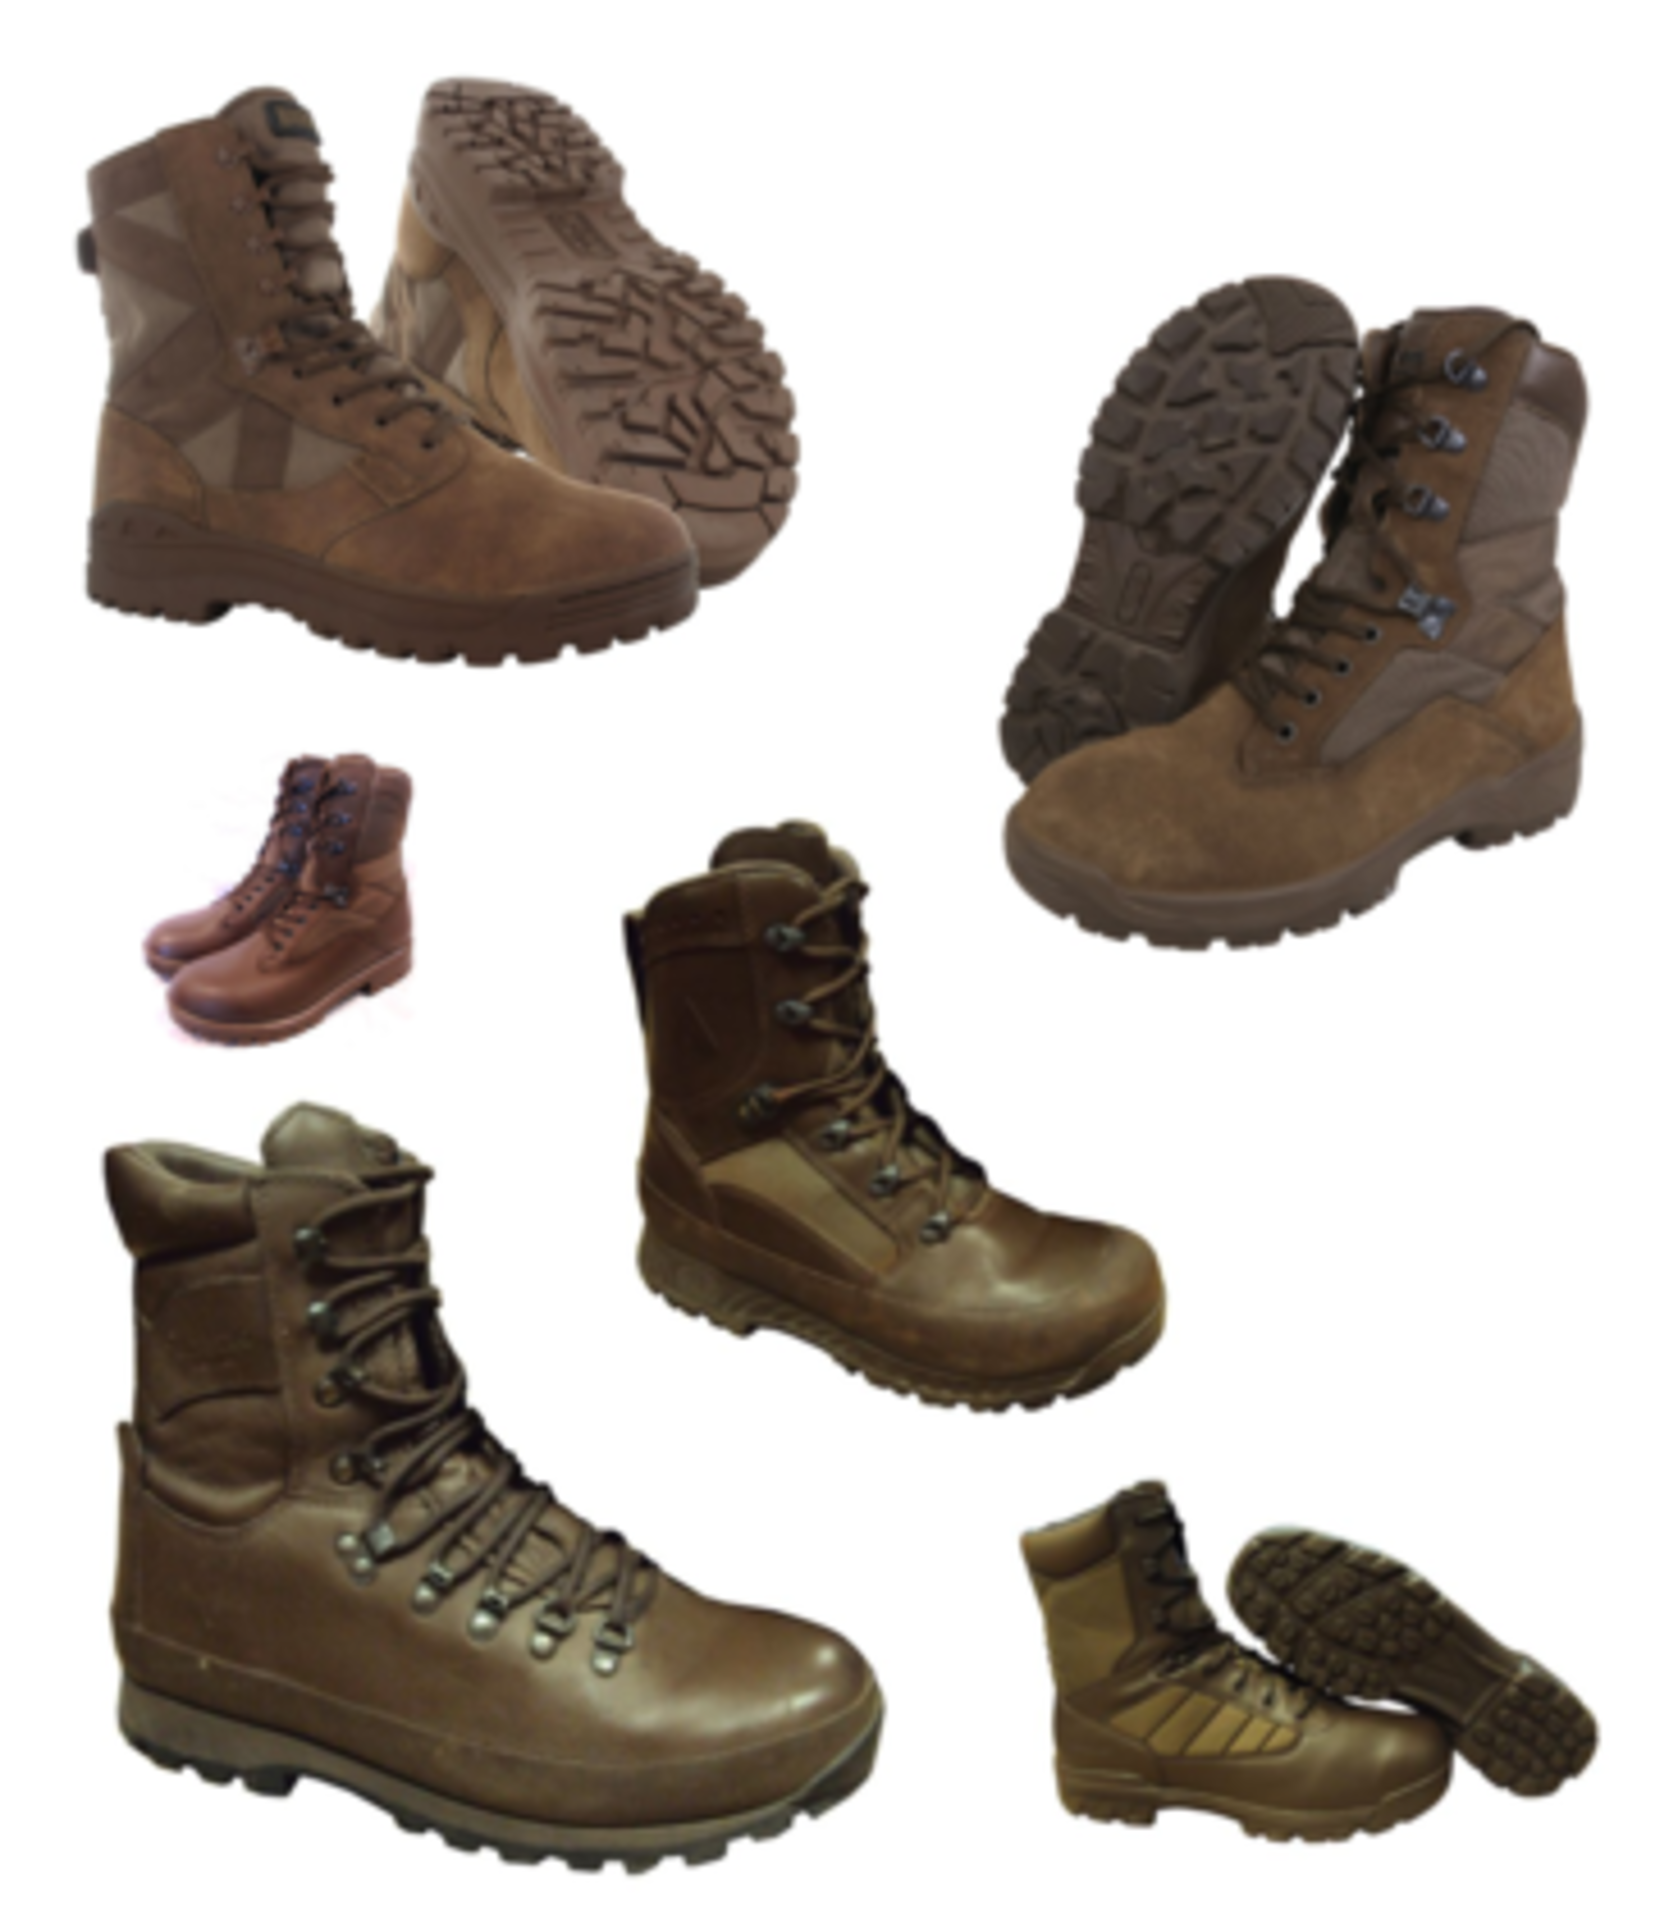 PACK OF 5 - BROWN BOOTS - MIX OF STYLES - SIZE 8 - GRADE 1